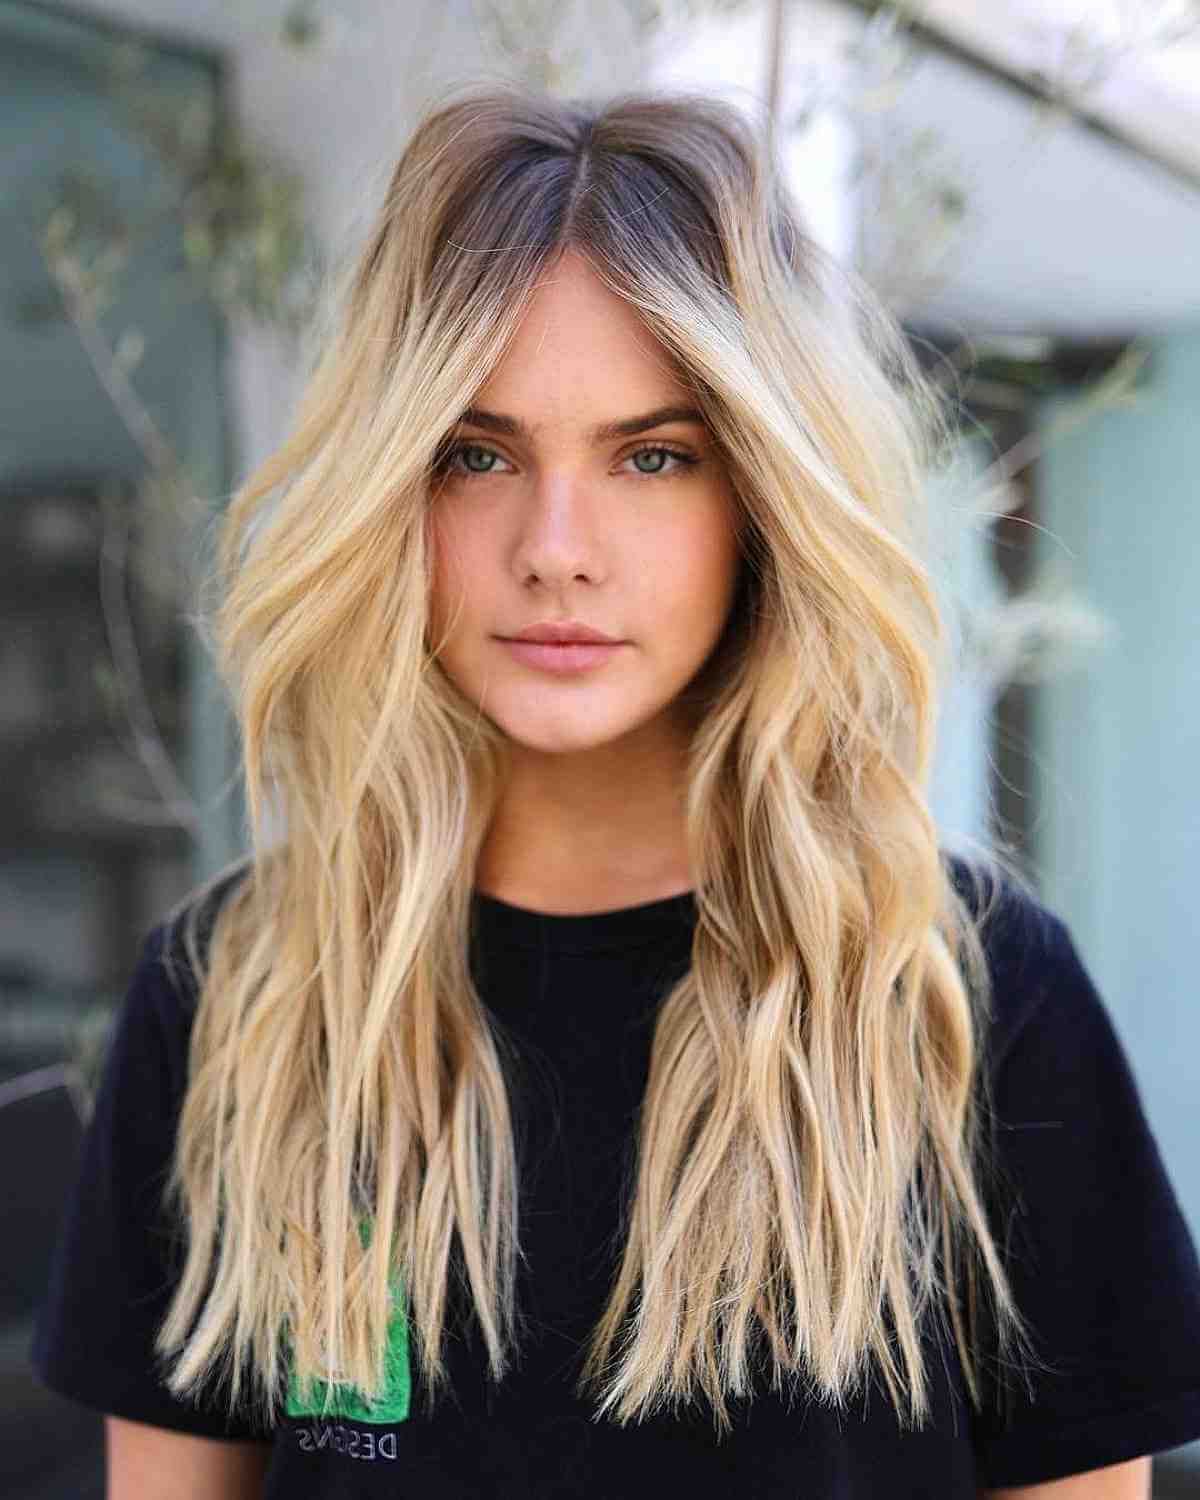 43 Flattering Middle Part Hairstyles Trending Right Now With Regard To Most Up To Date Wavy Medium Hairstyles With Middle Part (View 12 of 25)